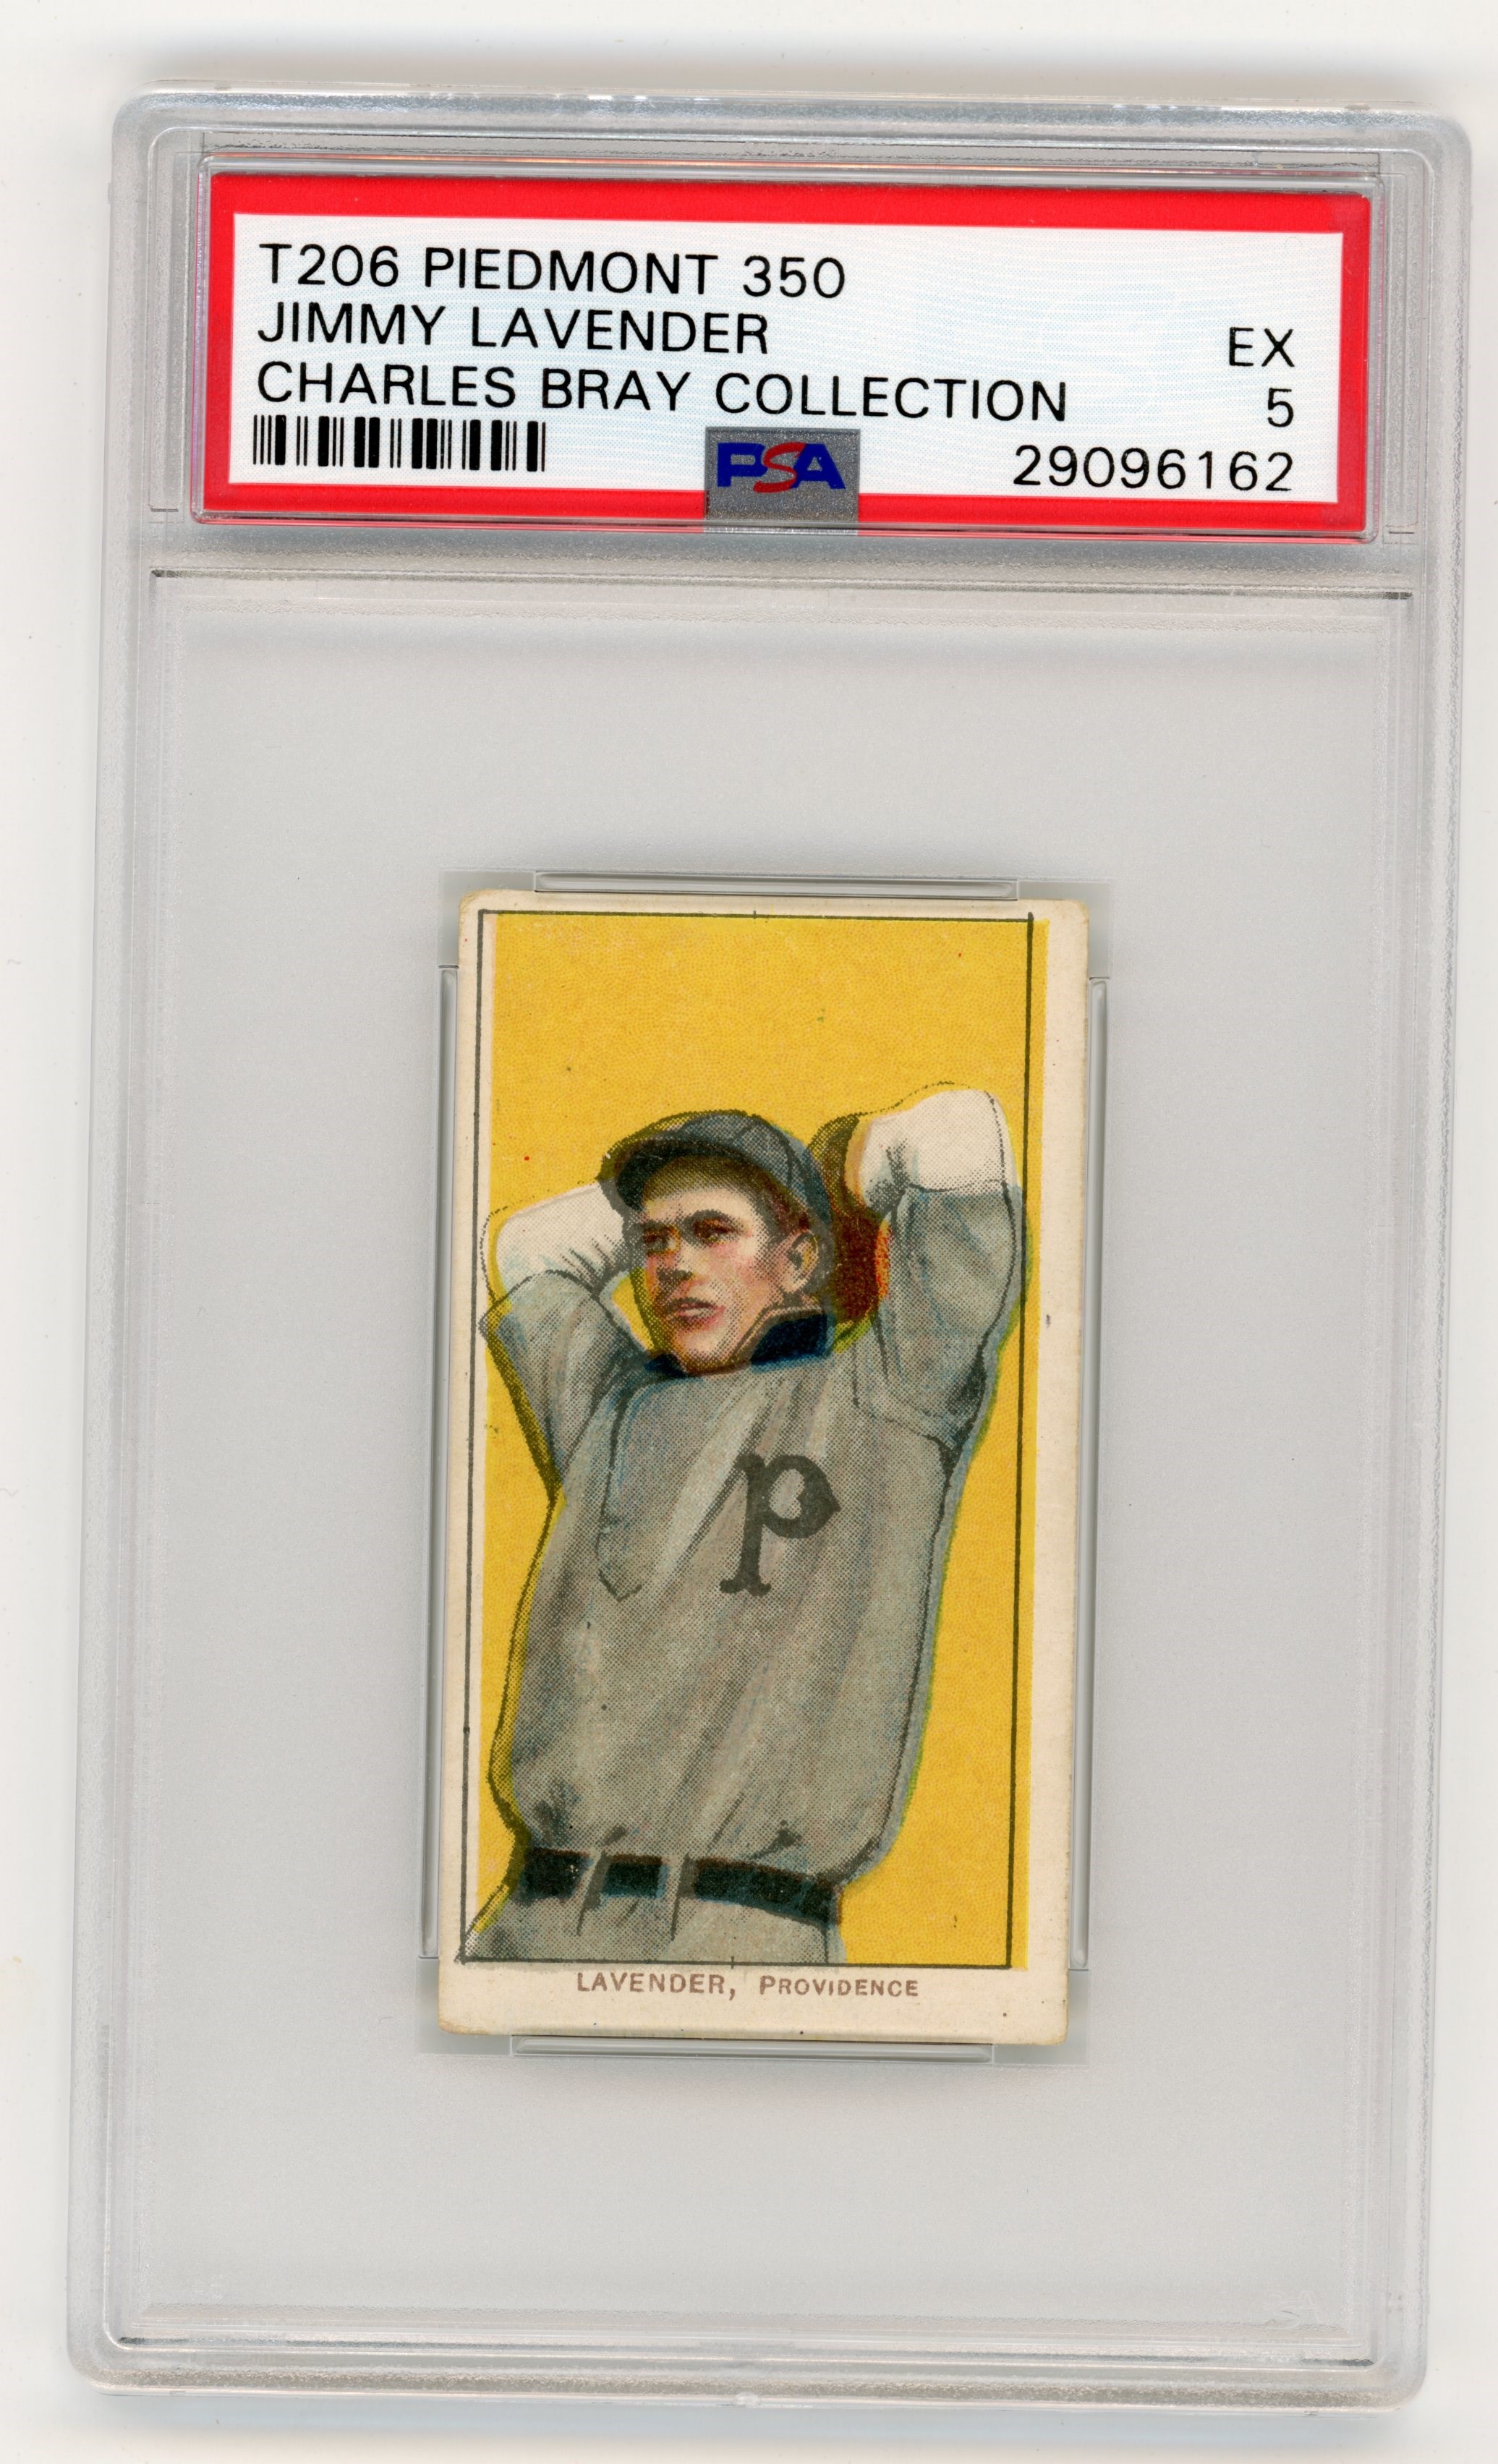 T206 Piedmont 350 Jimmy Lavender PSA EX 5 From the Charles Bray Collection.